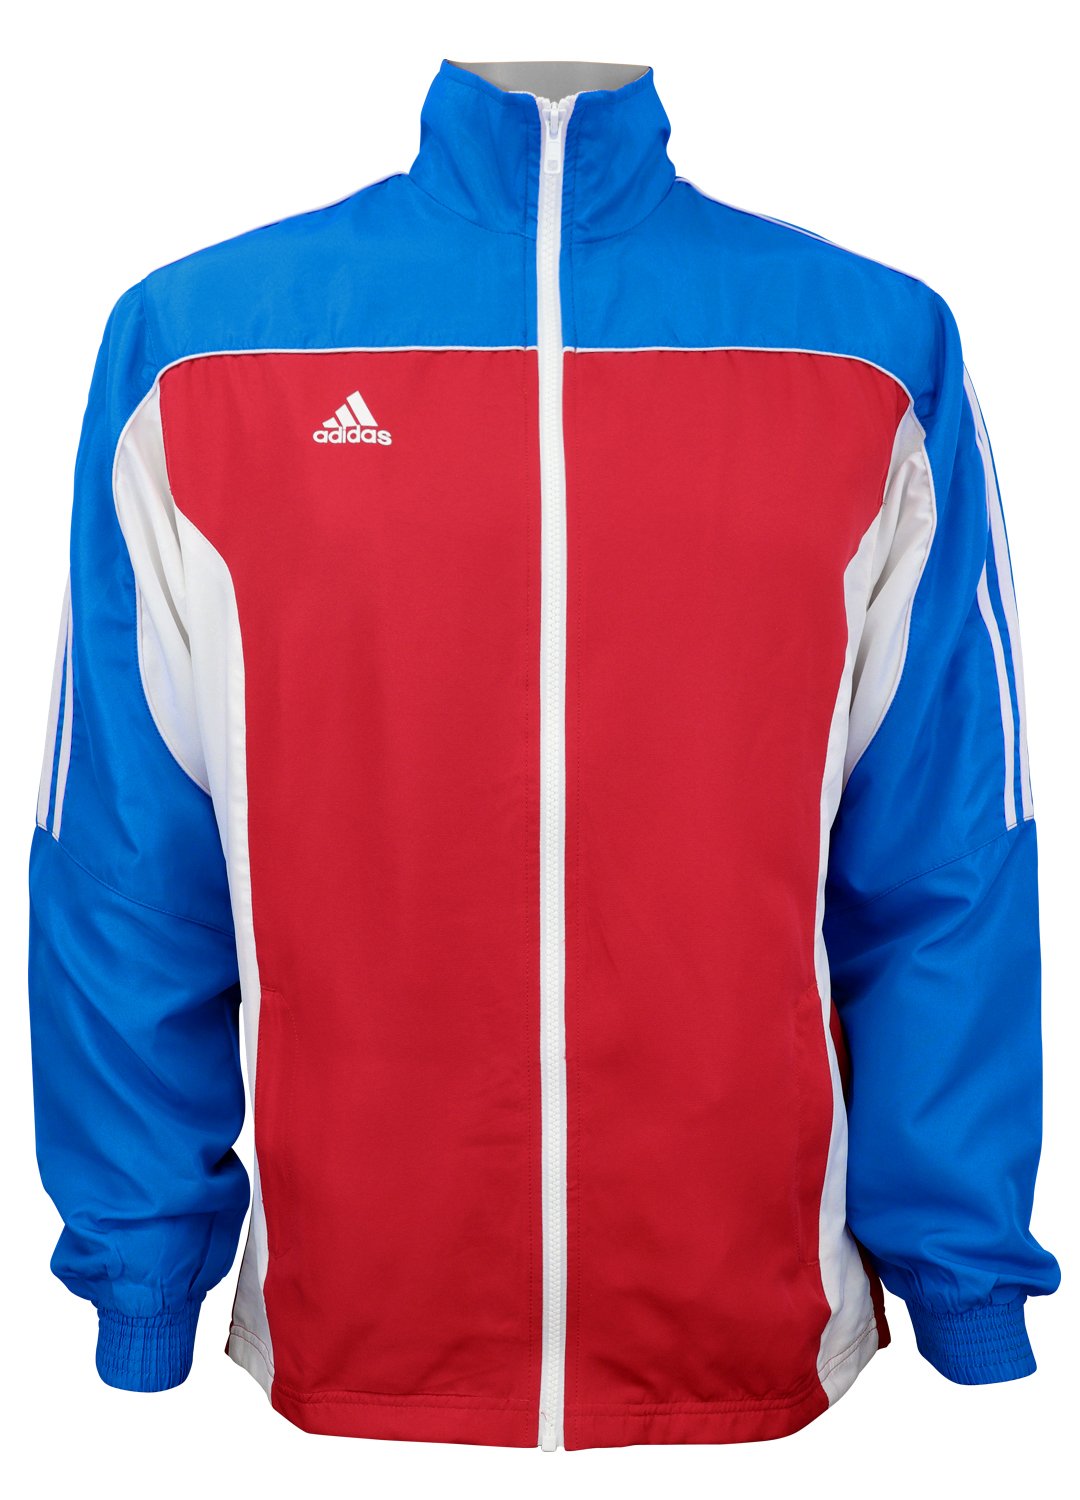 adidas red white and blue windbreaker